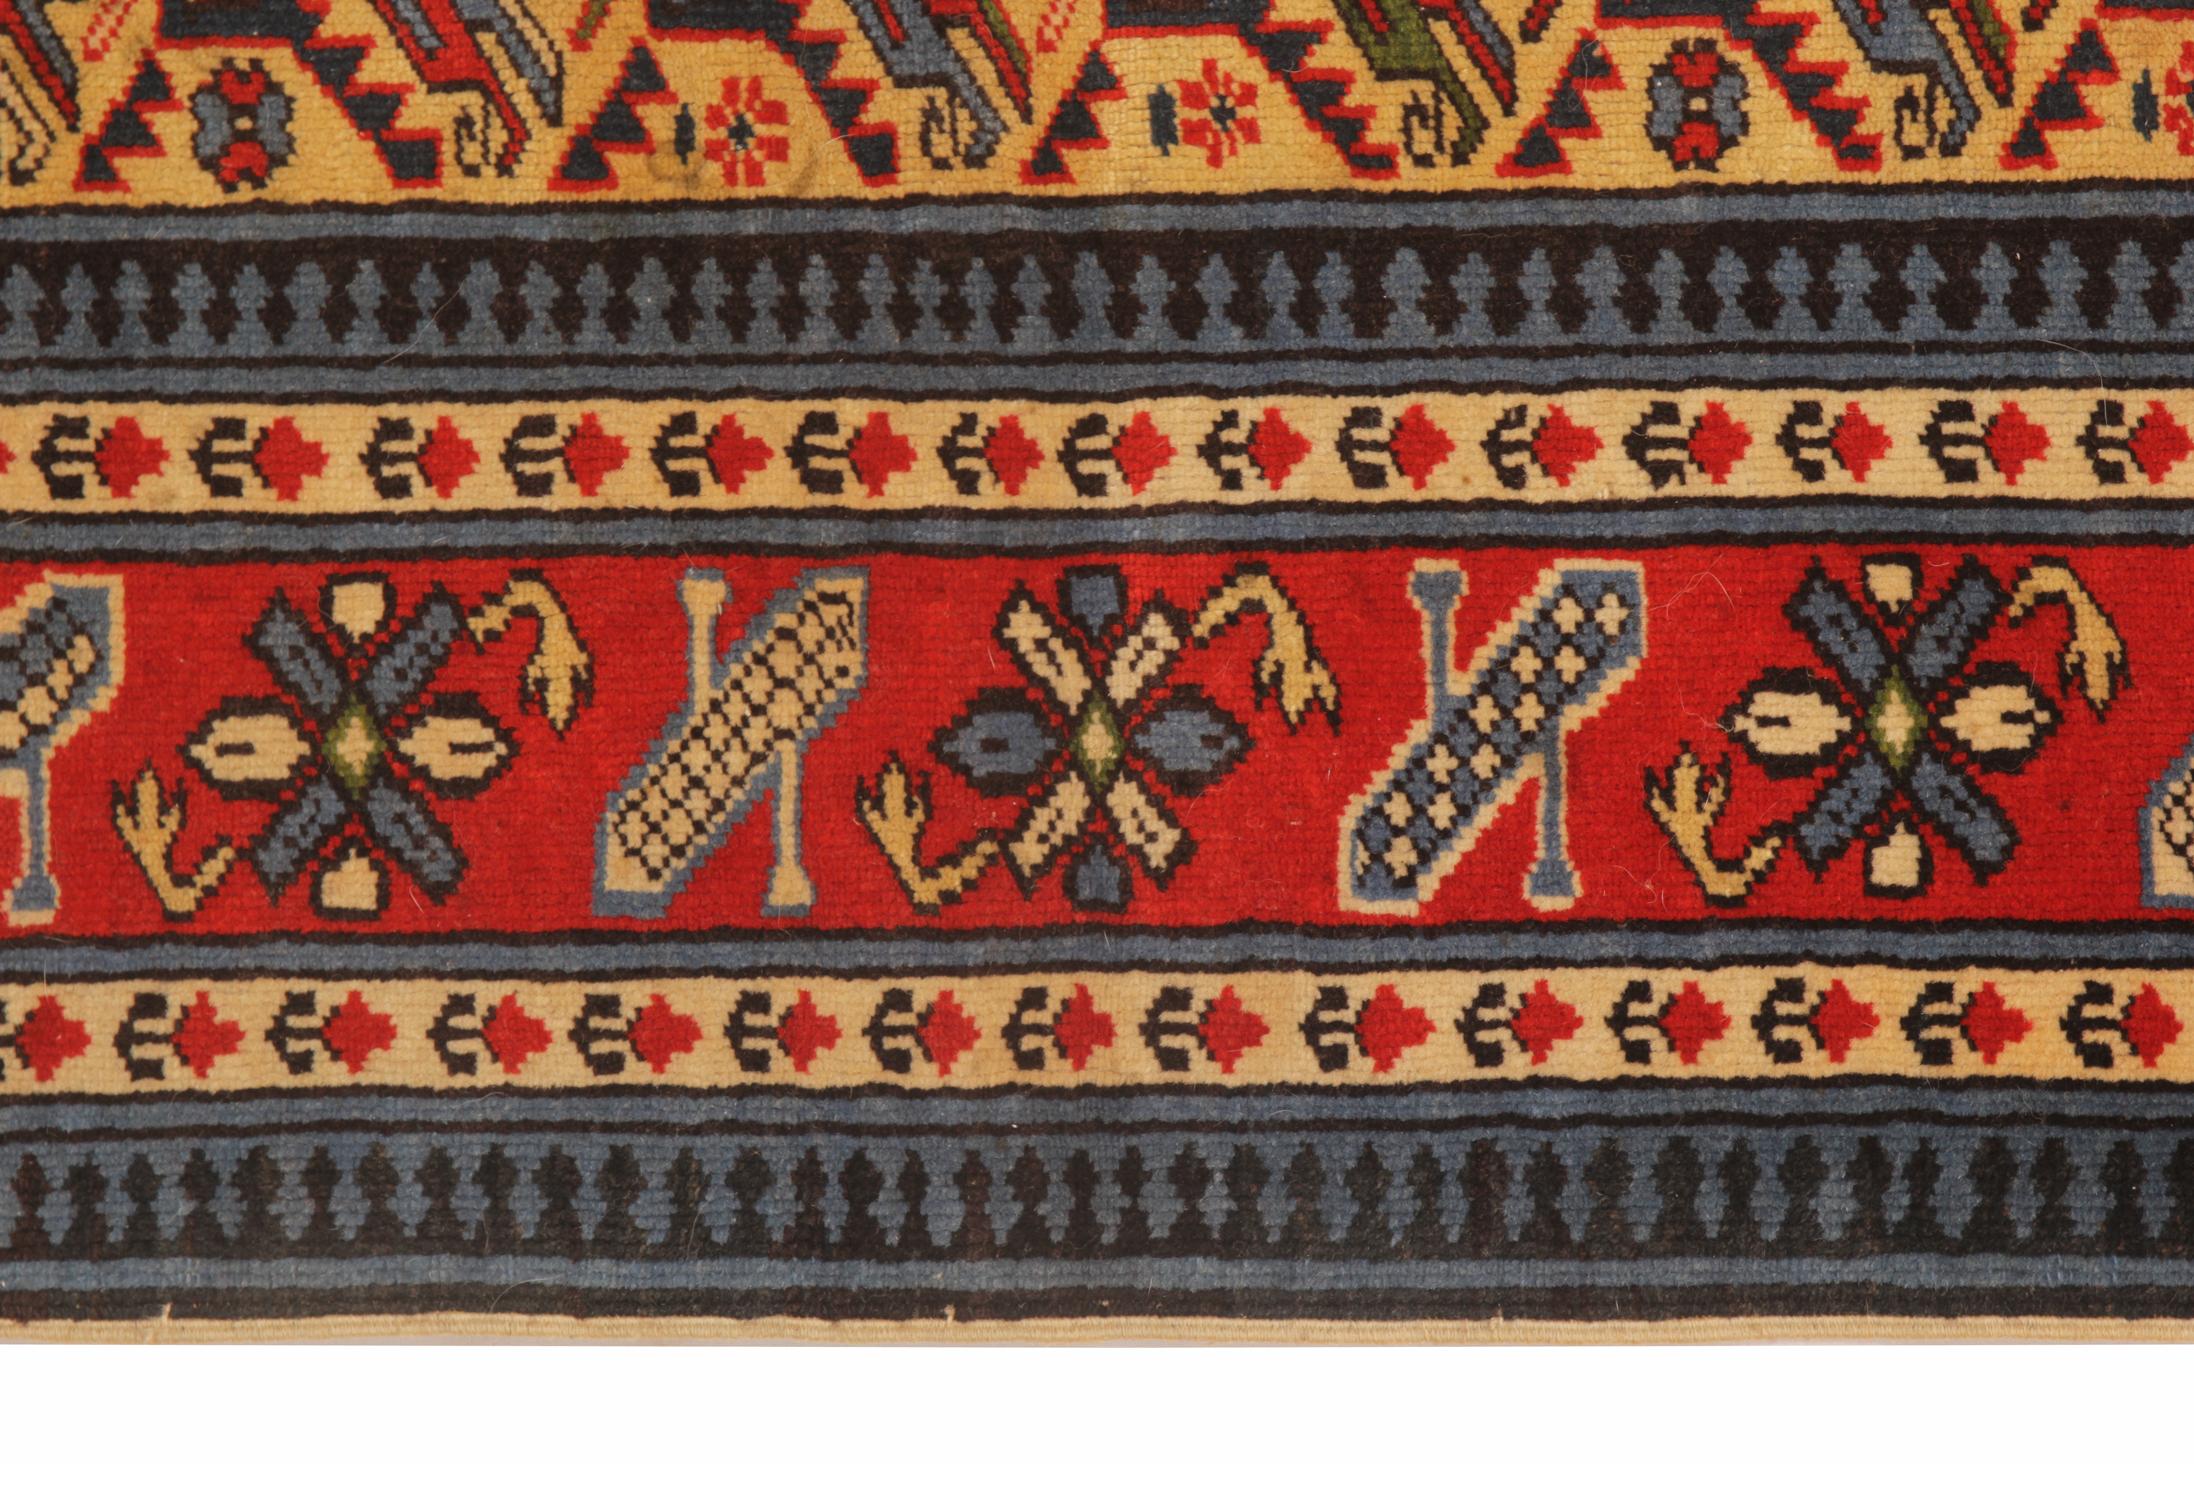 This Vintage Shirvan area red-blue rug is a small traditional red and blue rug. We are featuring a repeat pattern central design on an orange/ yellow background enclosed by a multi-layered floral motif border. Woven with handspun Vegetable dyed wool